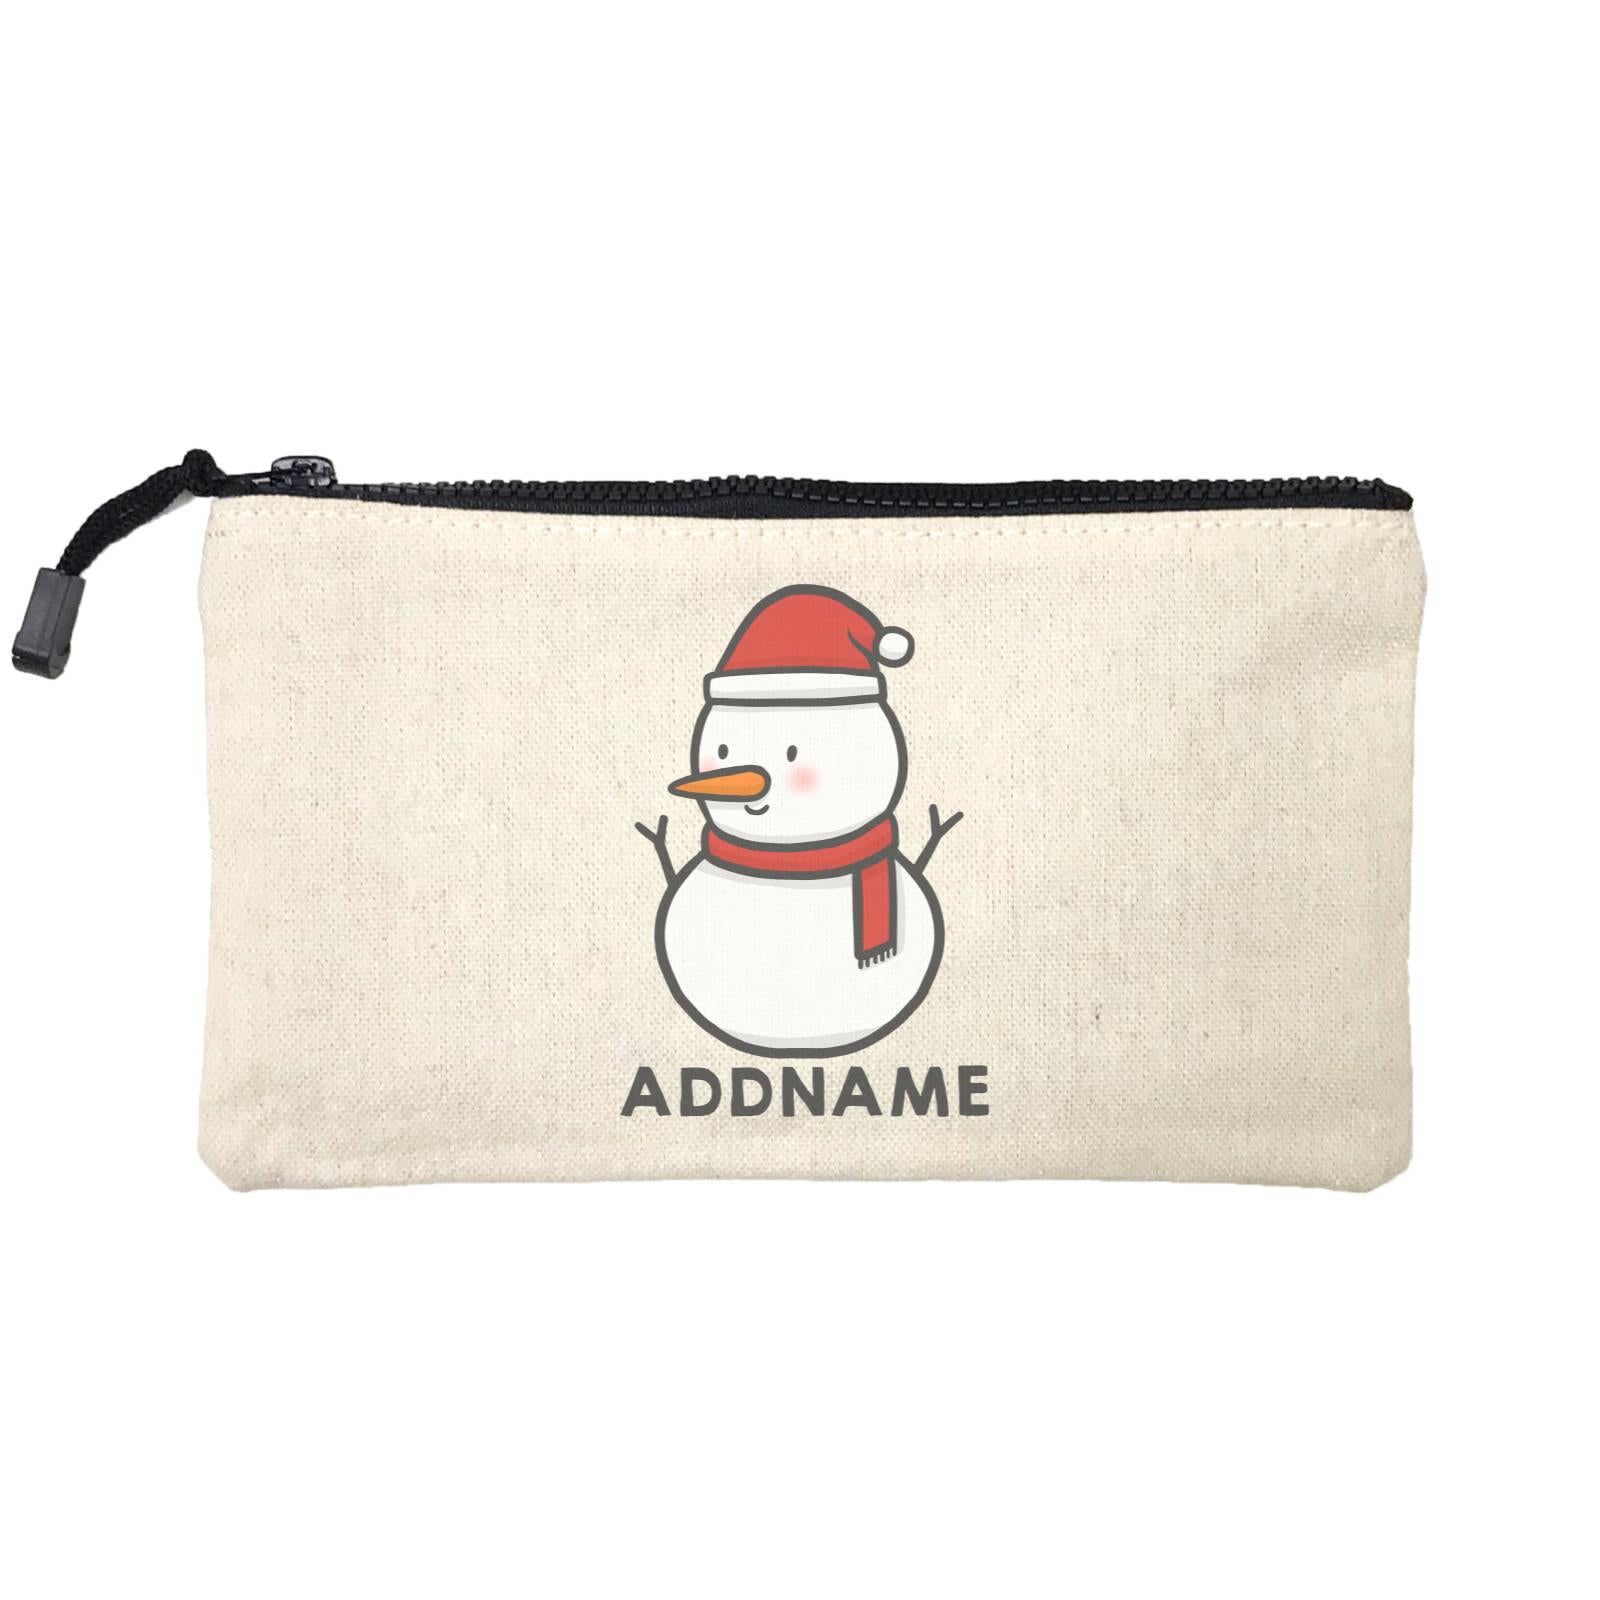 Xmas Cute Snowman Facing Left Addname Mini Accessories Stationery Pouch